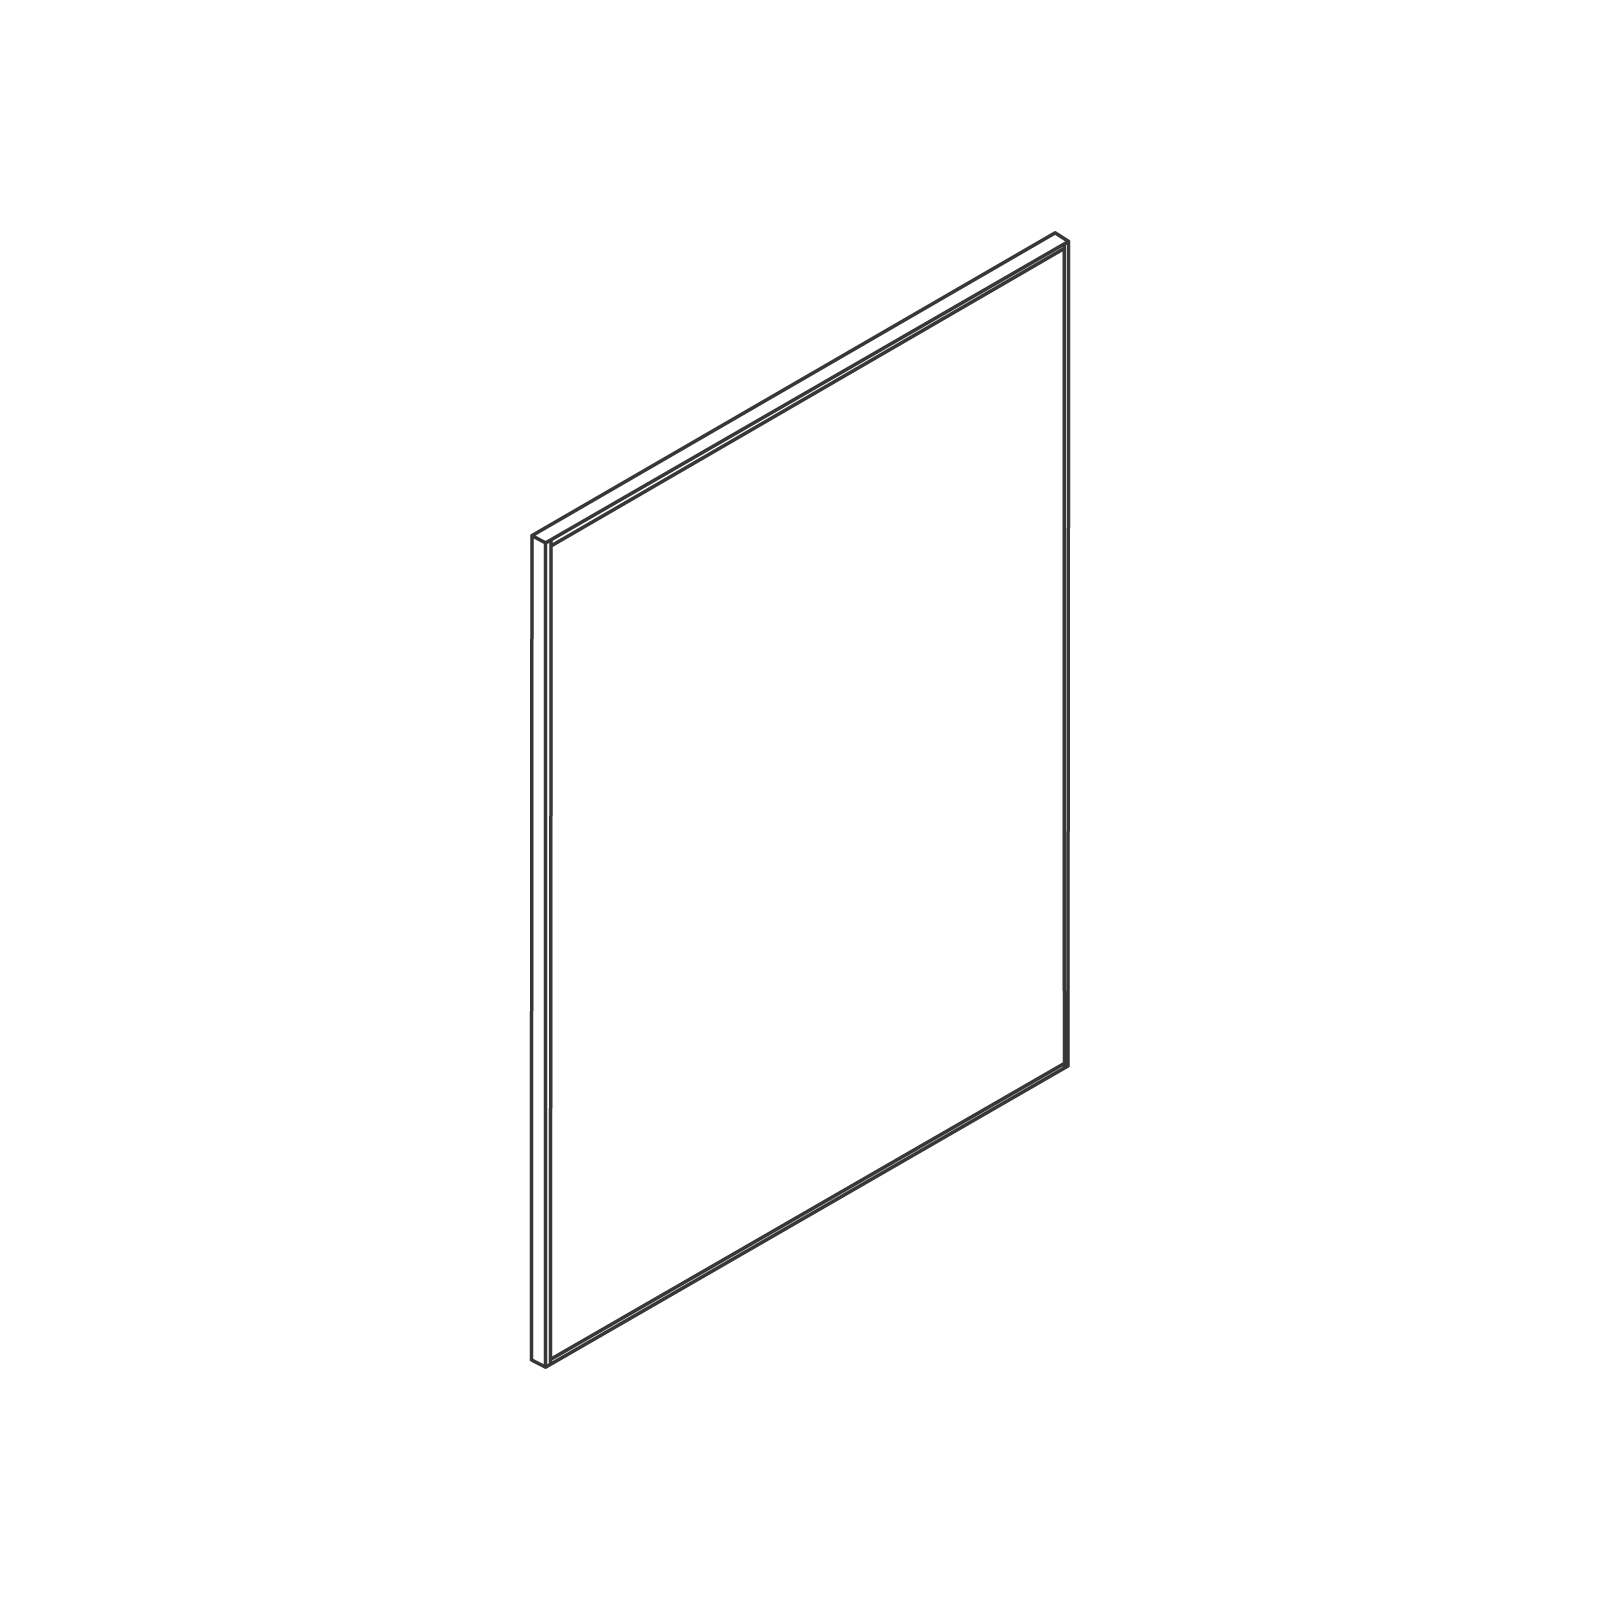 A line drawing - OE1 Mobile Easel–Project Board